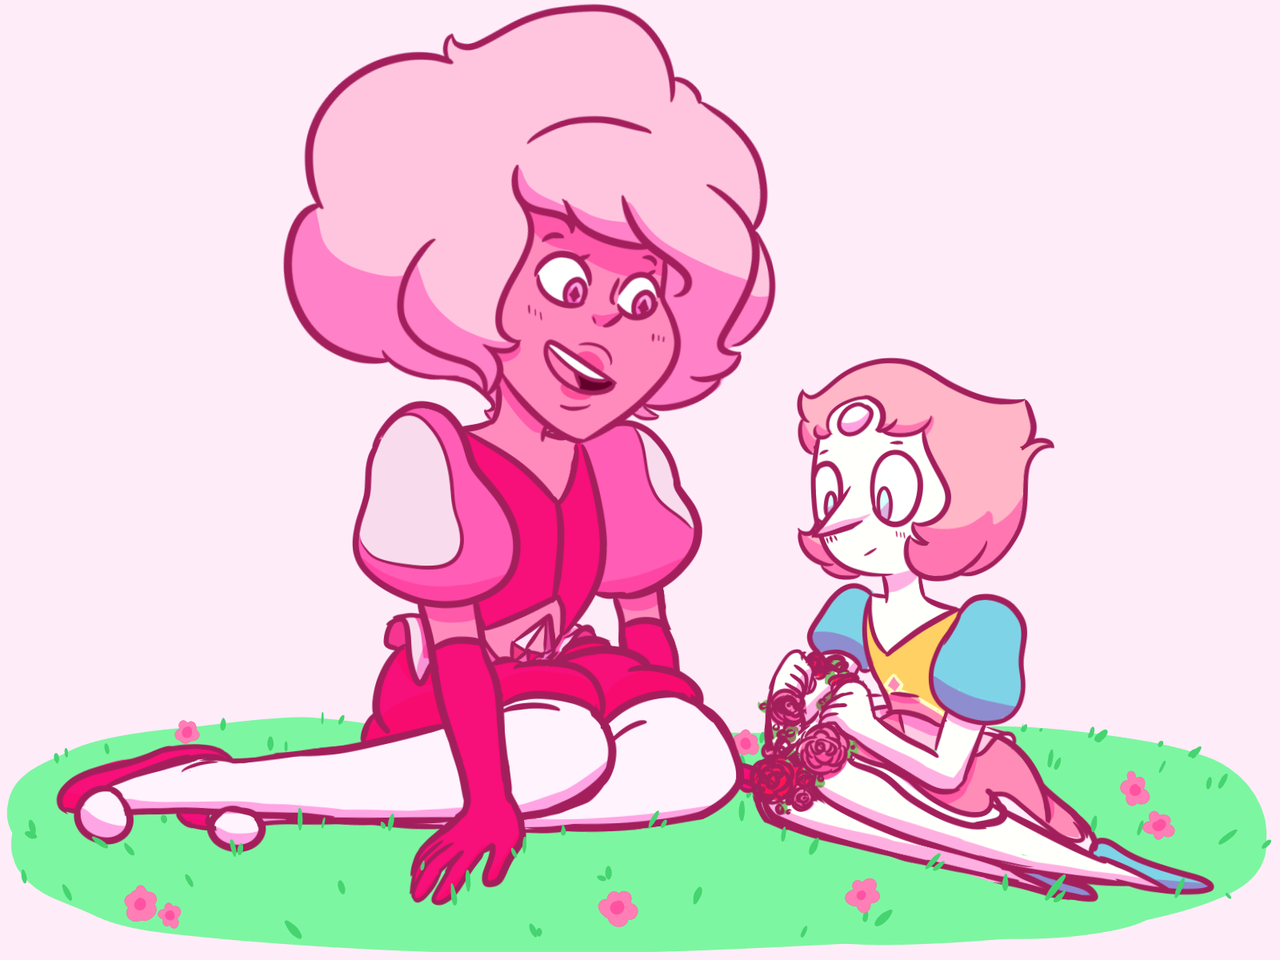 Some Steven Universe requests from Instagram